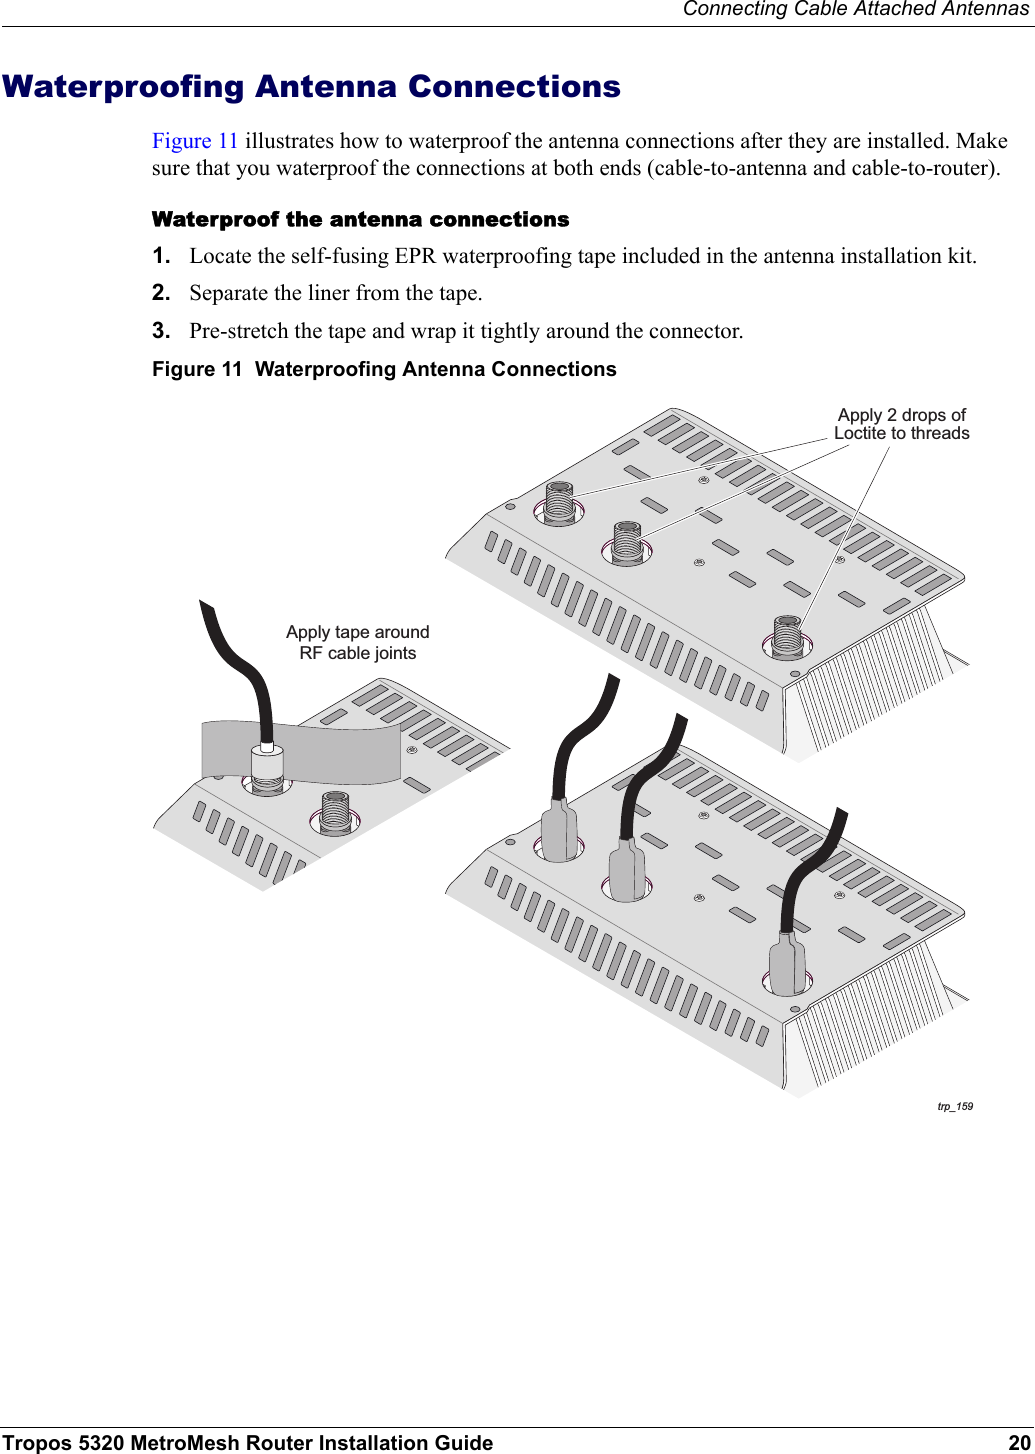 Connecting Cable Attached AntennasTropos 5320 MetroMesh Router Installation Guide 20Waterproofing Antenna ConnectionsFigure 11 illustrates how to waterproof the antenna connections after they are installed. Make sure that you waterproof the connections at both ends (cable-to-antenna and cable-to-router).Waterproof the antenna connections1. Locate the self-fusing EPR waterproofing tape included in the antenna installation kit.2. Separate the liner from the tape.3. Pre-stretch the tape and wrap it tightly around the connector.Figure 11  Waterproofing Antenna Connectionstrp_159Apply tape aroundRF cable jointsApply 2 drops ofLoctite to threads